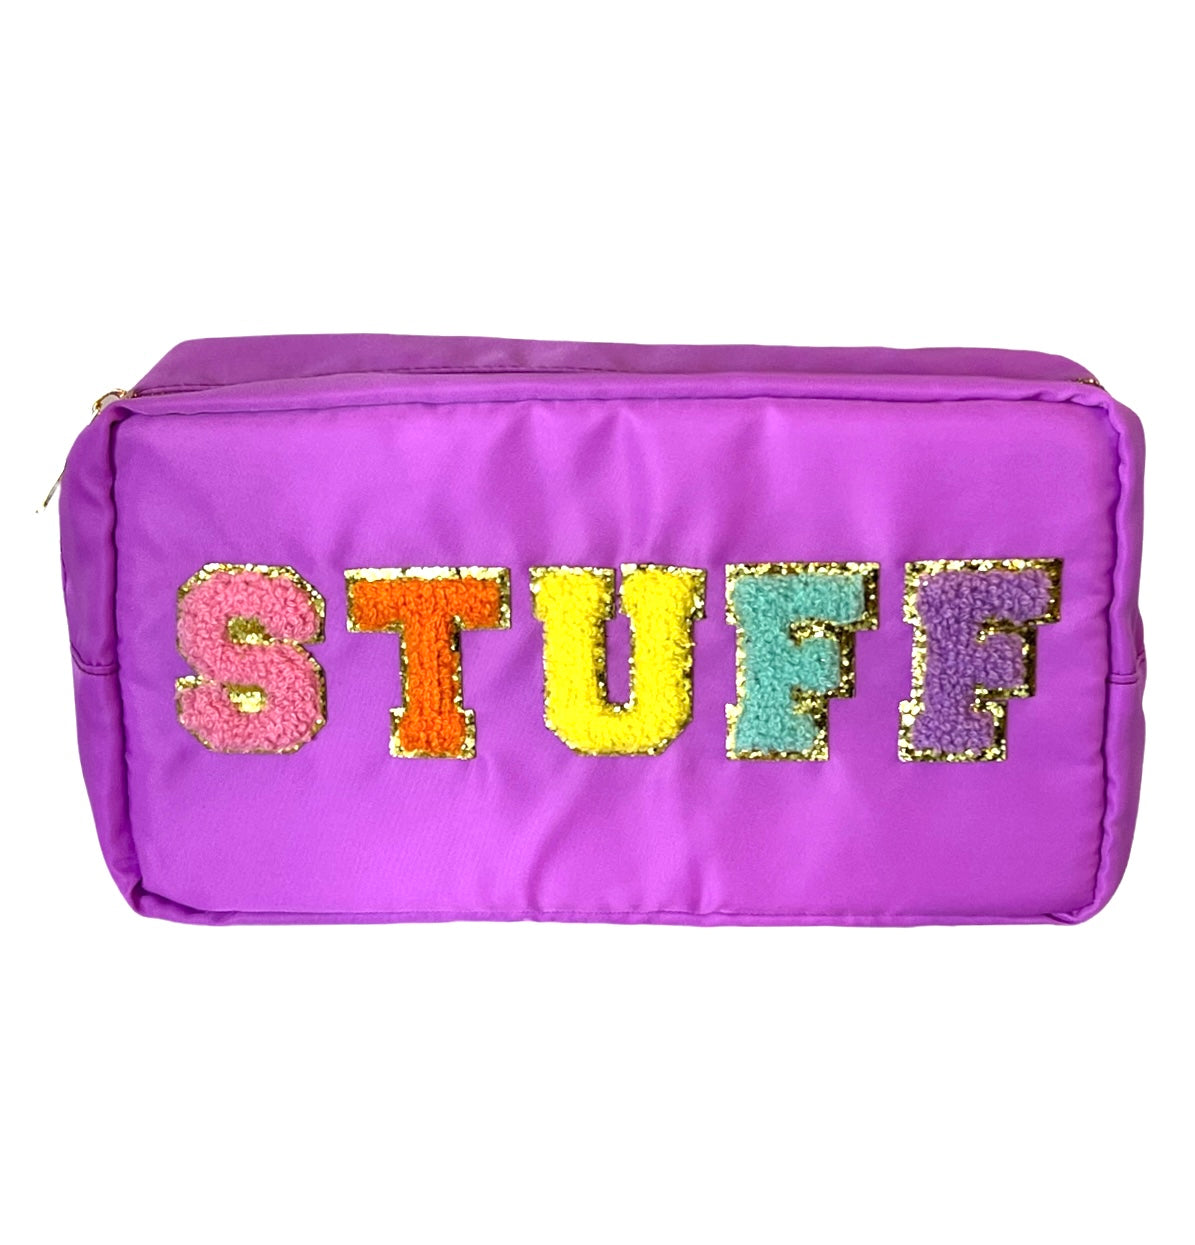 purple nylon zipper bag with "stuff" stitched on in colorful chenille patches.